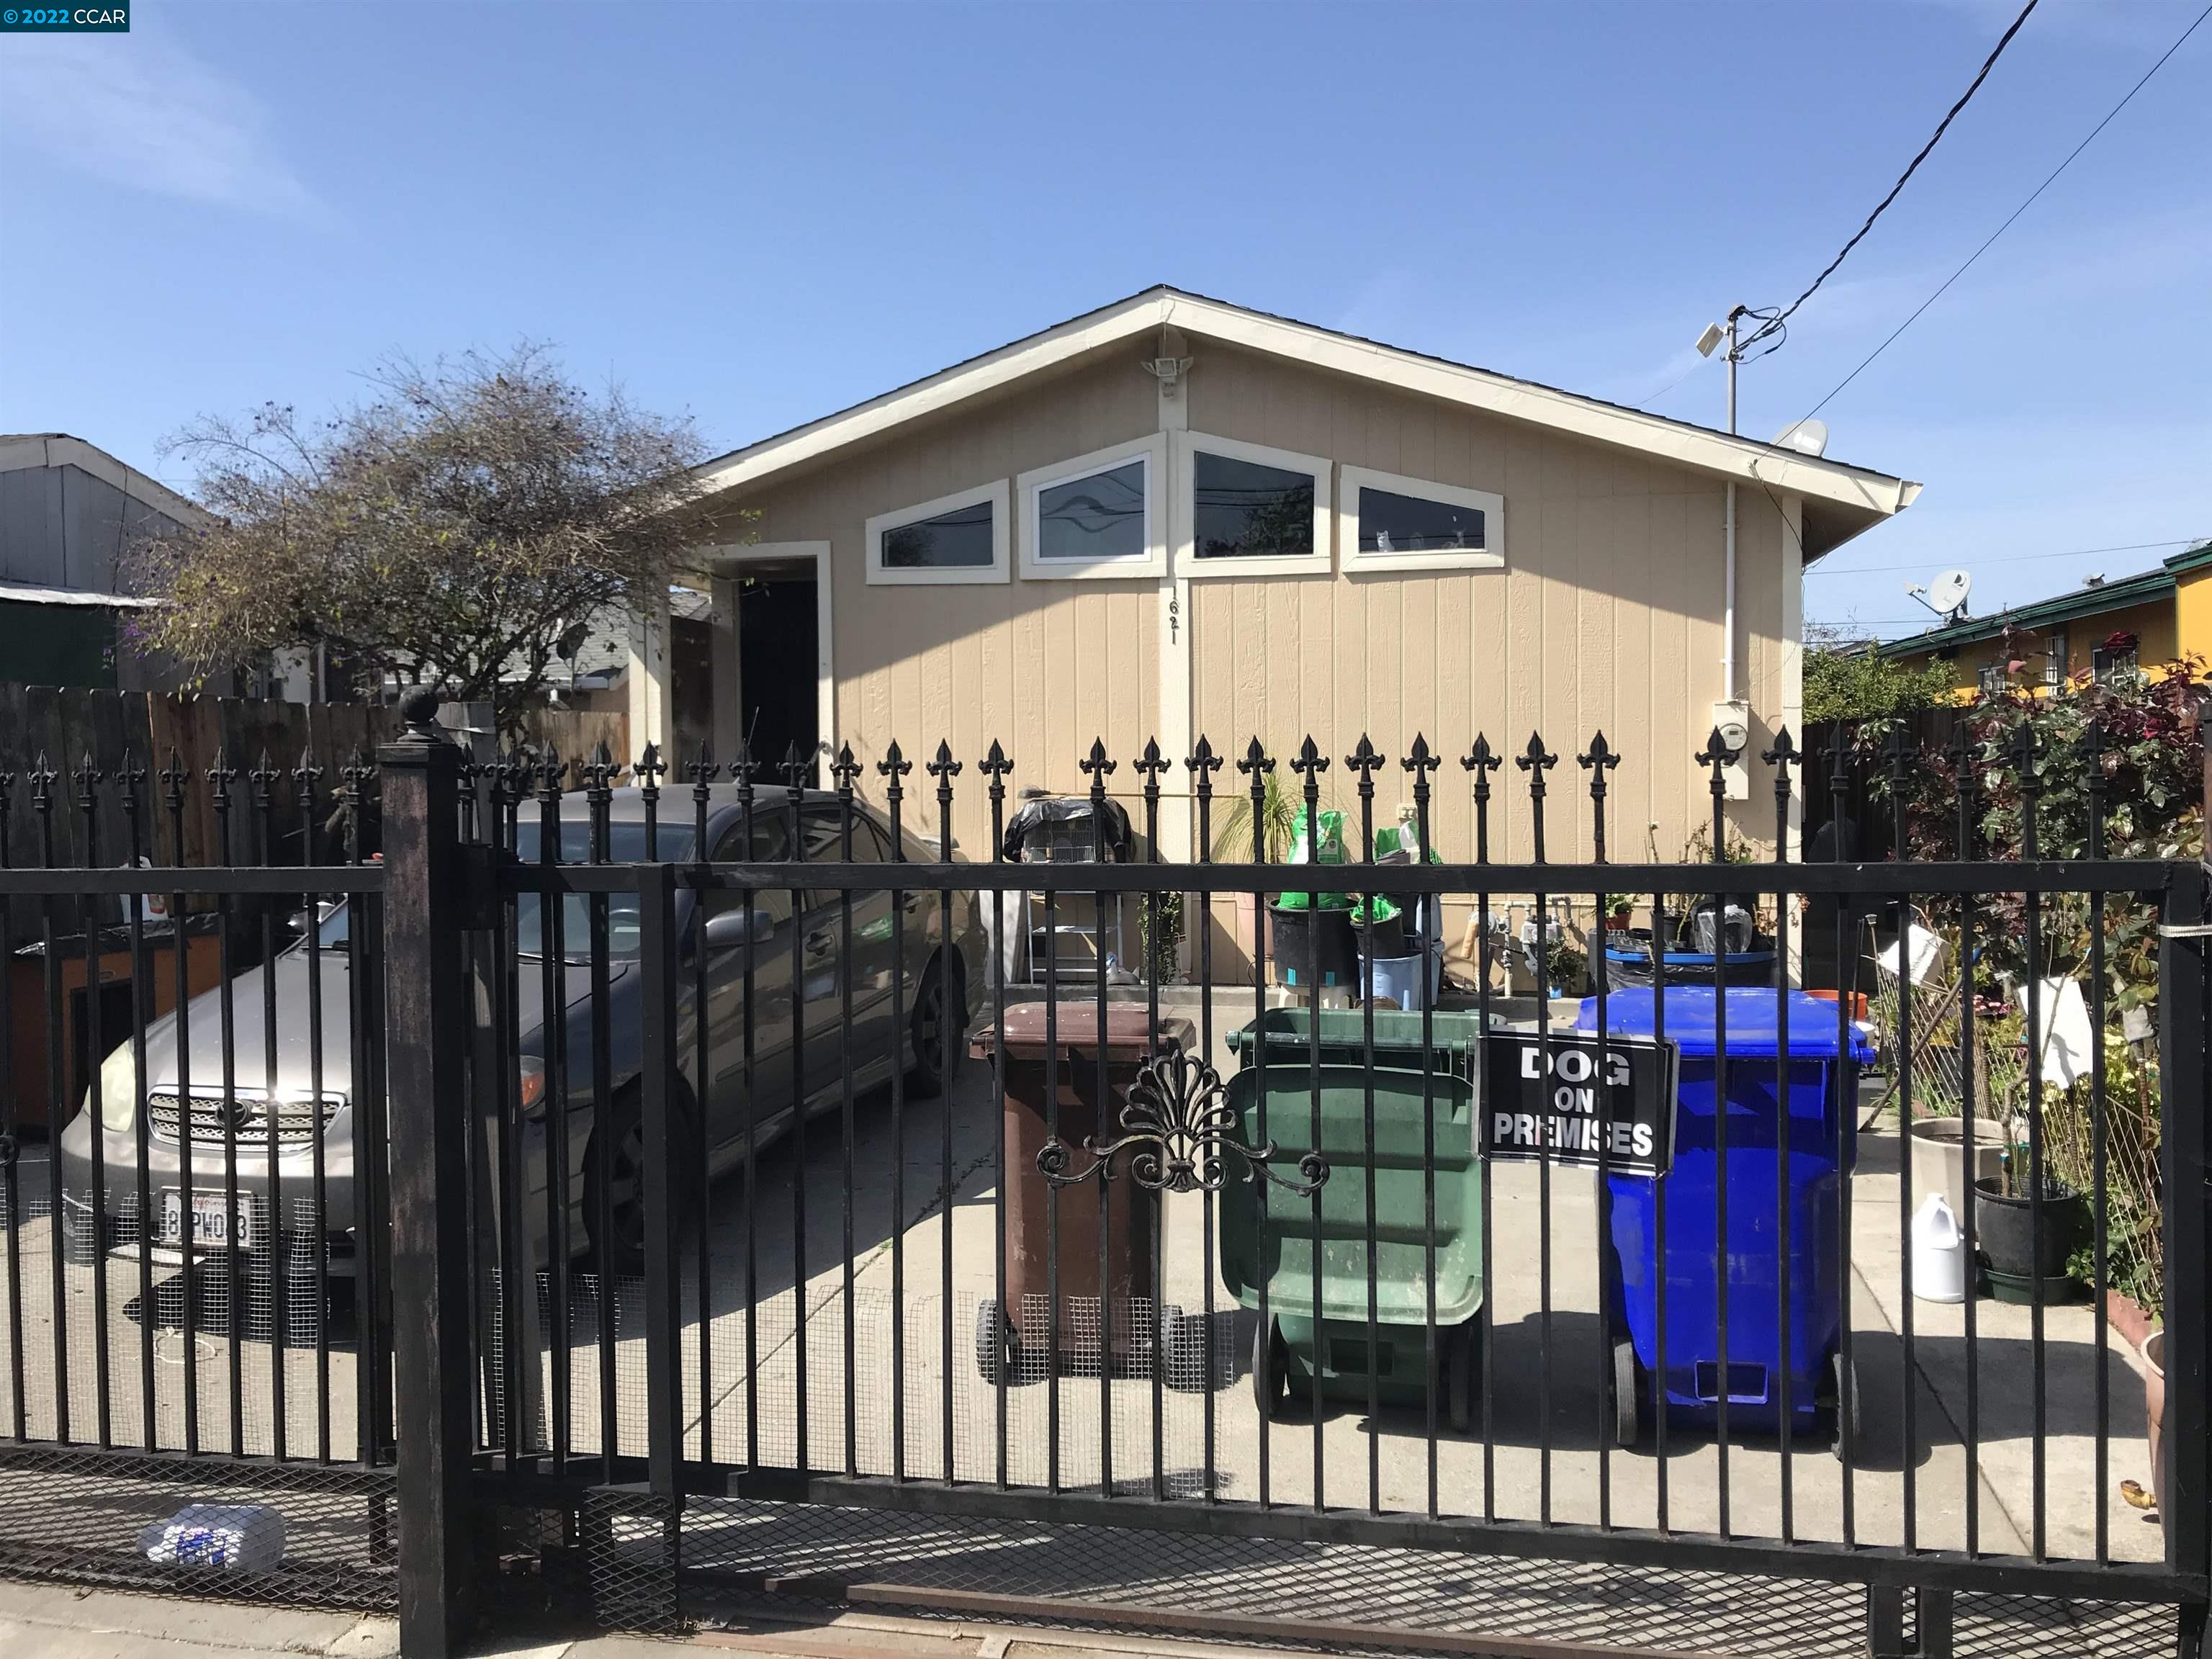 This 3 bedrooms 2 full bathrooms features fresh exterior paint, backyard storage, new roof, and wrought iron security gate. Conveniently located near schools, hospital, Richmond Bart & Ferry, public transit, shopping, and easy access to FWY 580.